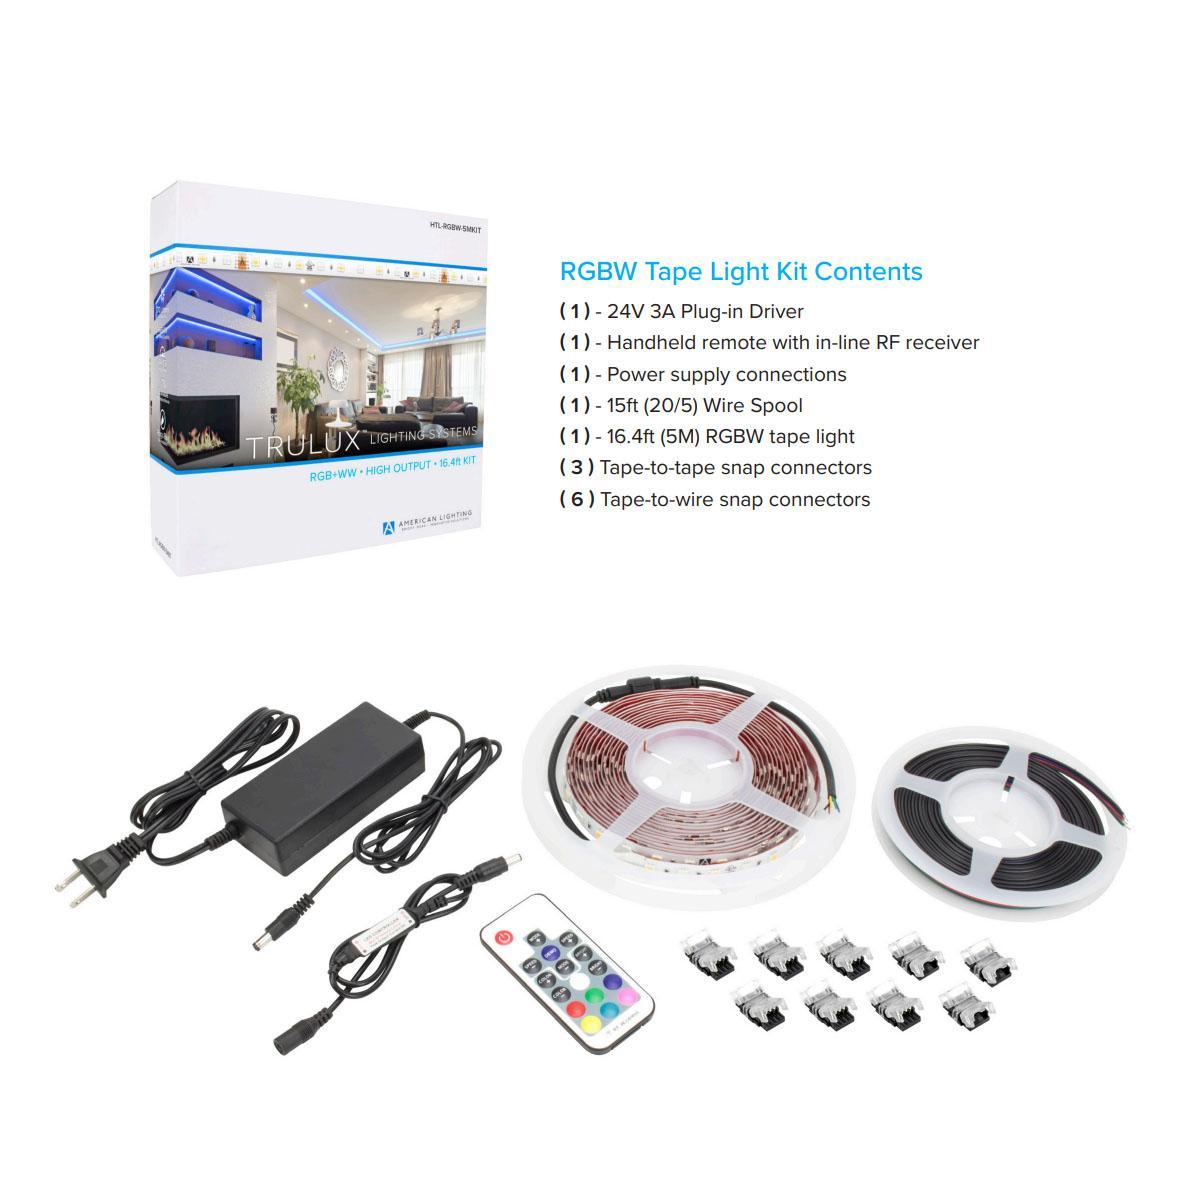 Trulux High Output LED Strip Light Kit with Remote control, 16.4Ft Reel with 24V DC Kit with Plug and Play Connection, RGB + 3000K, 240 Lumens per Ft